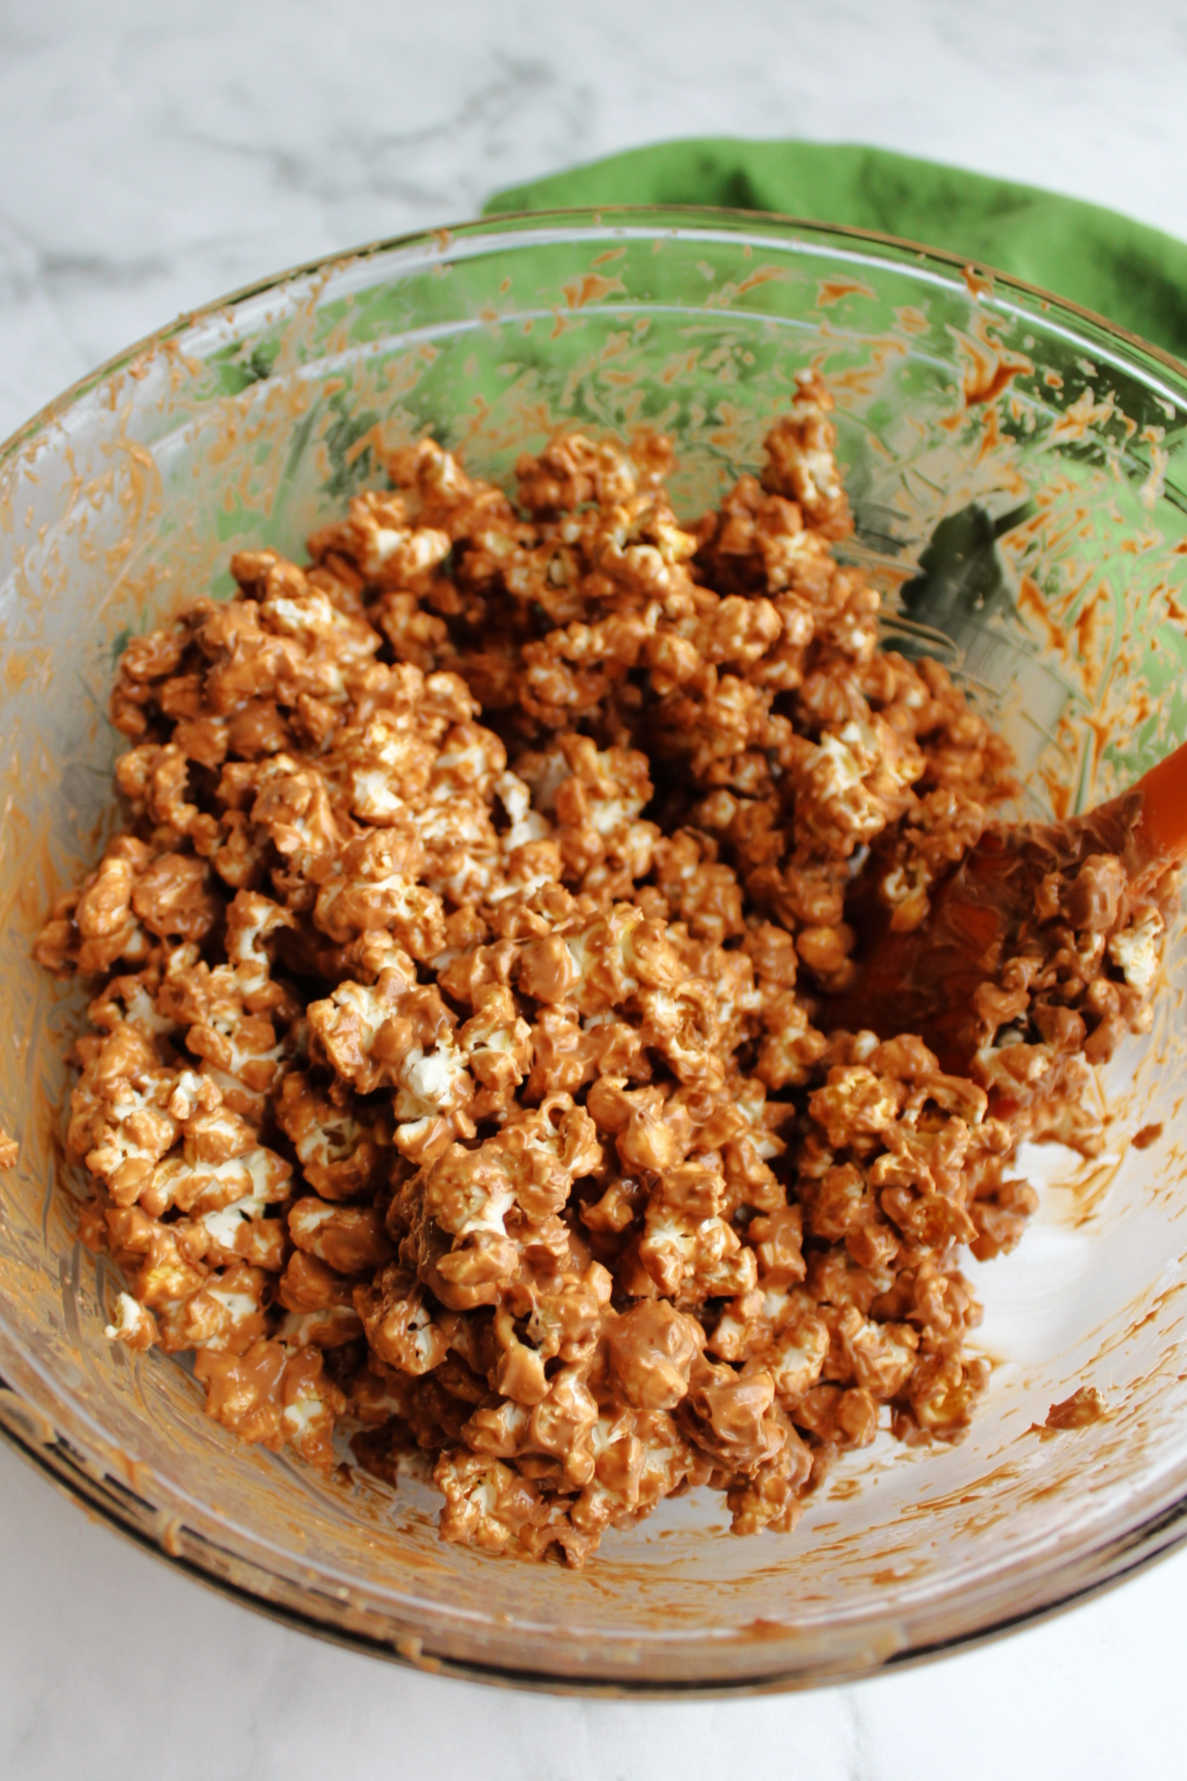 Popcorn coated in peanut butter and chocolate mixture.